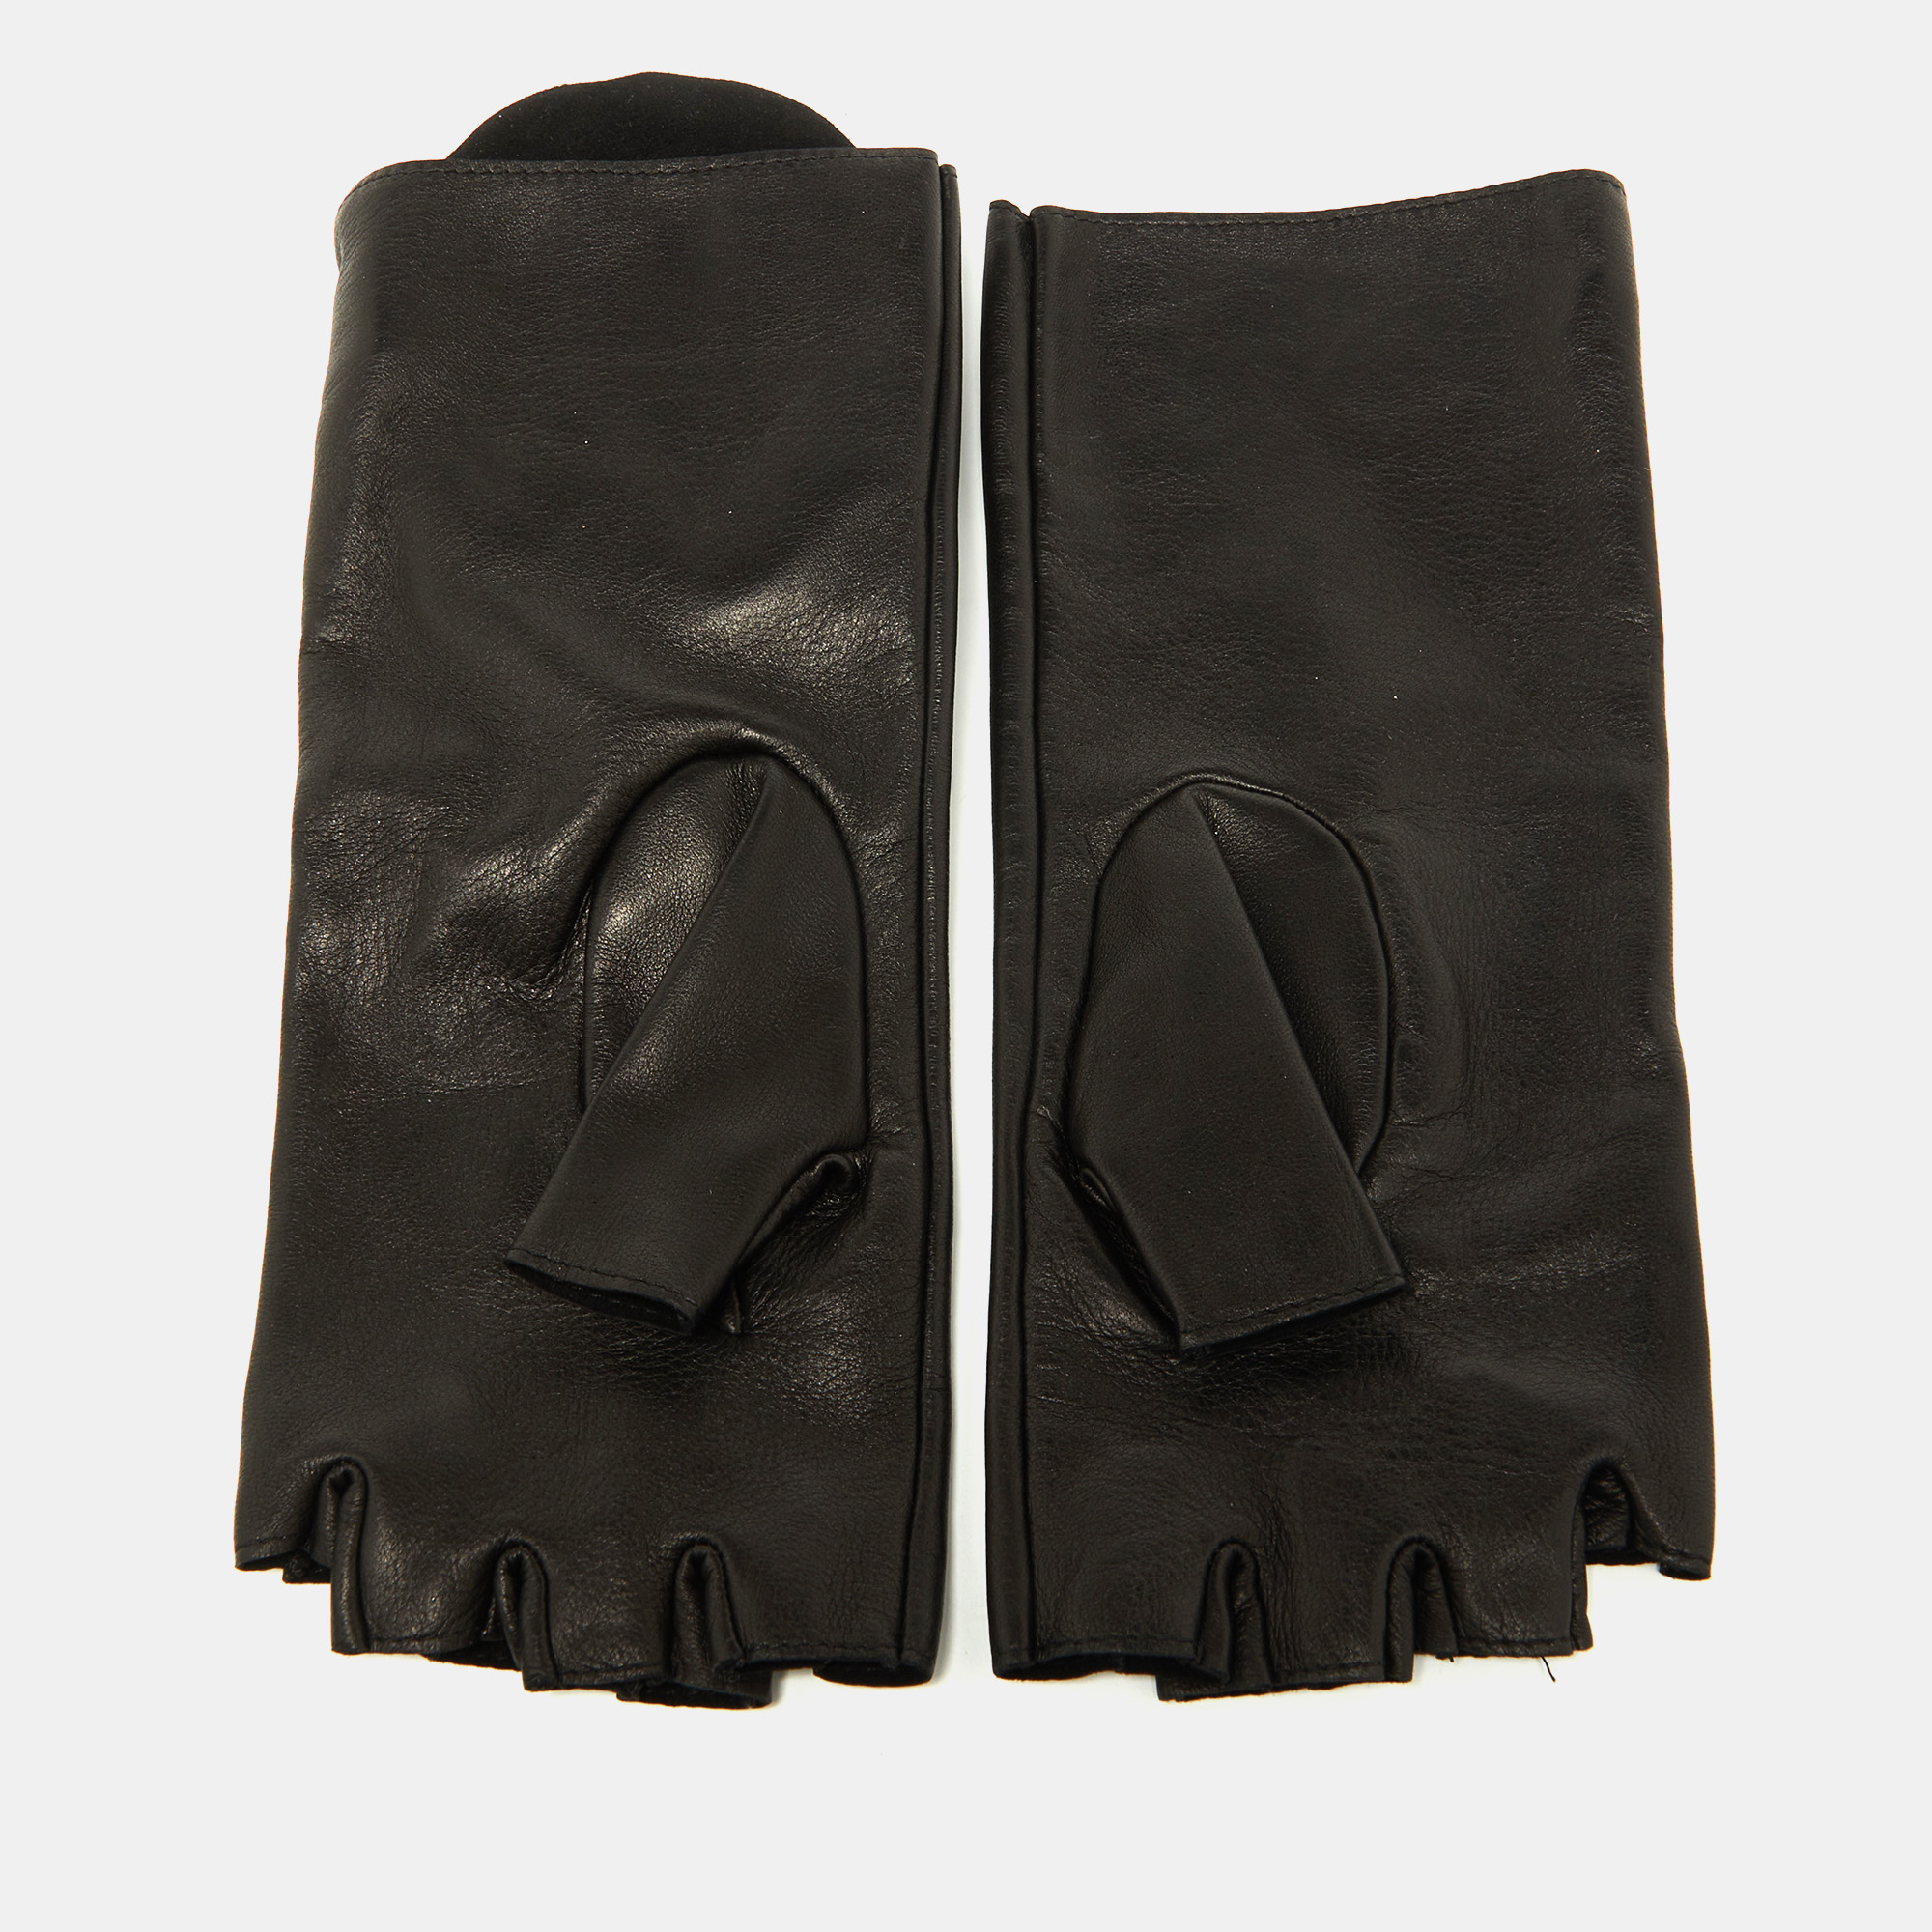 Chanel Black Leather Pouch Detail Fingerless Gloves Size 7.5